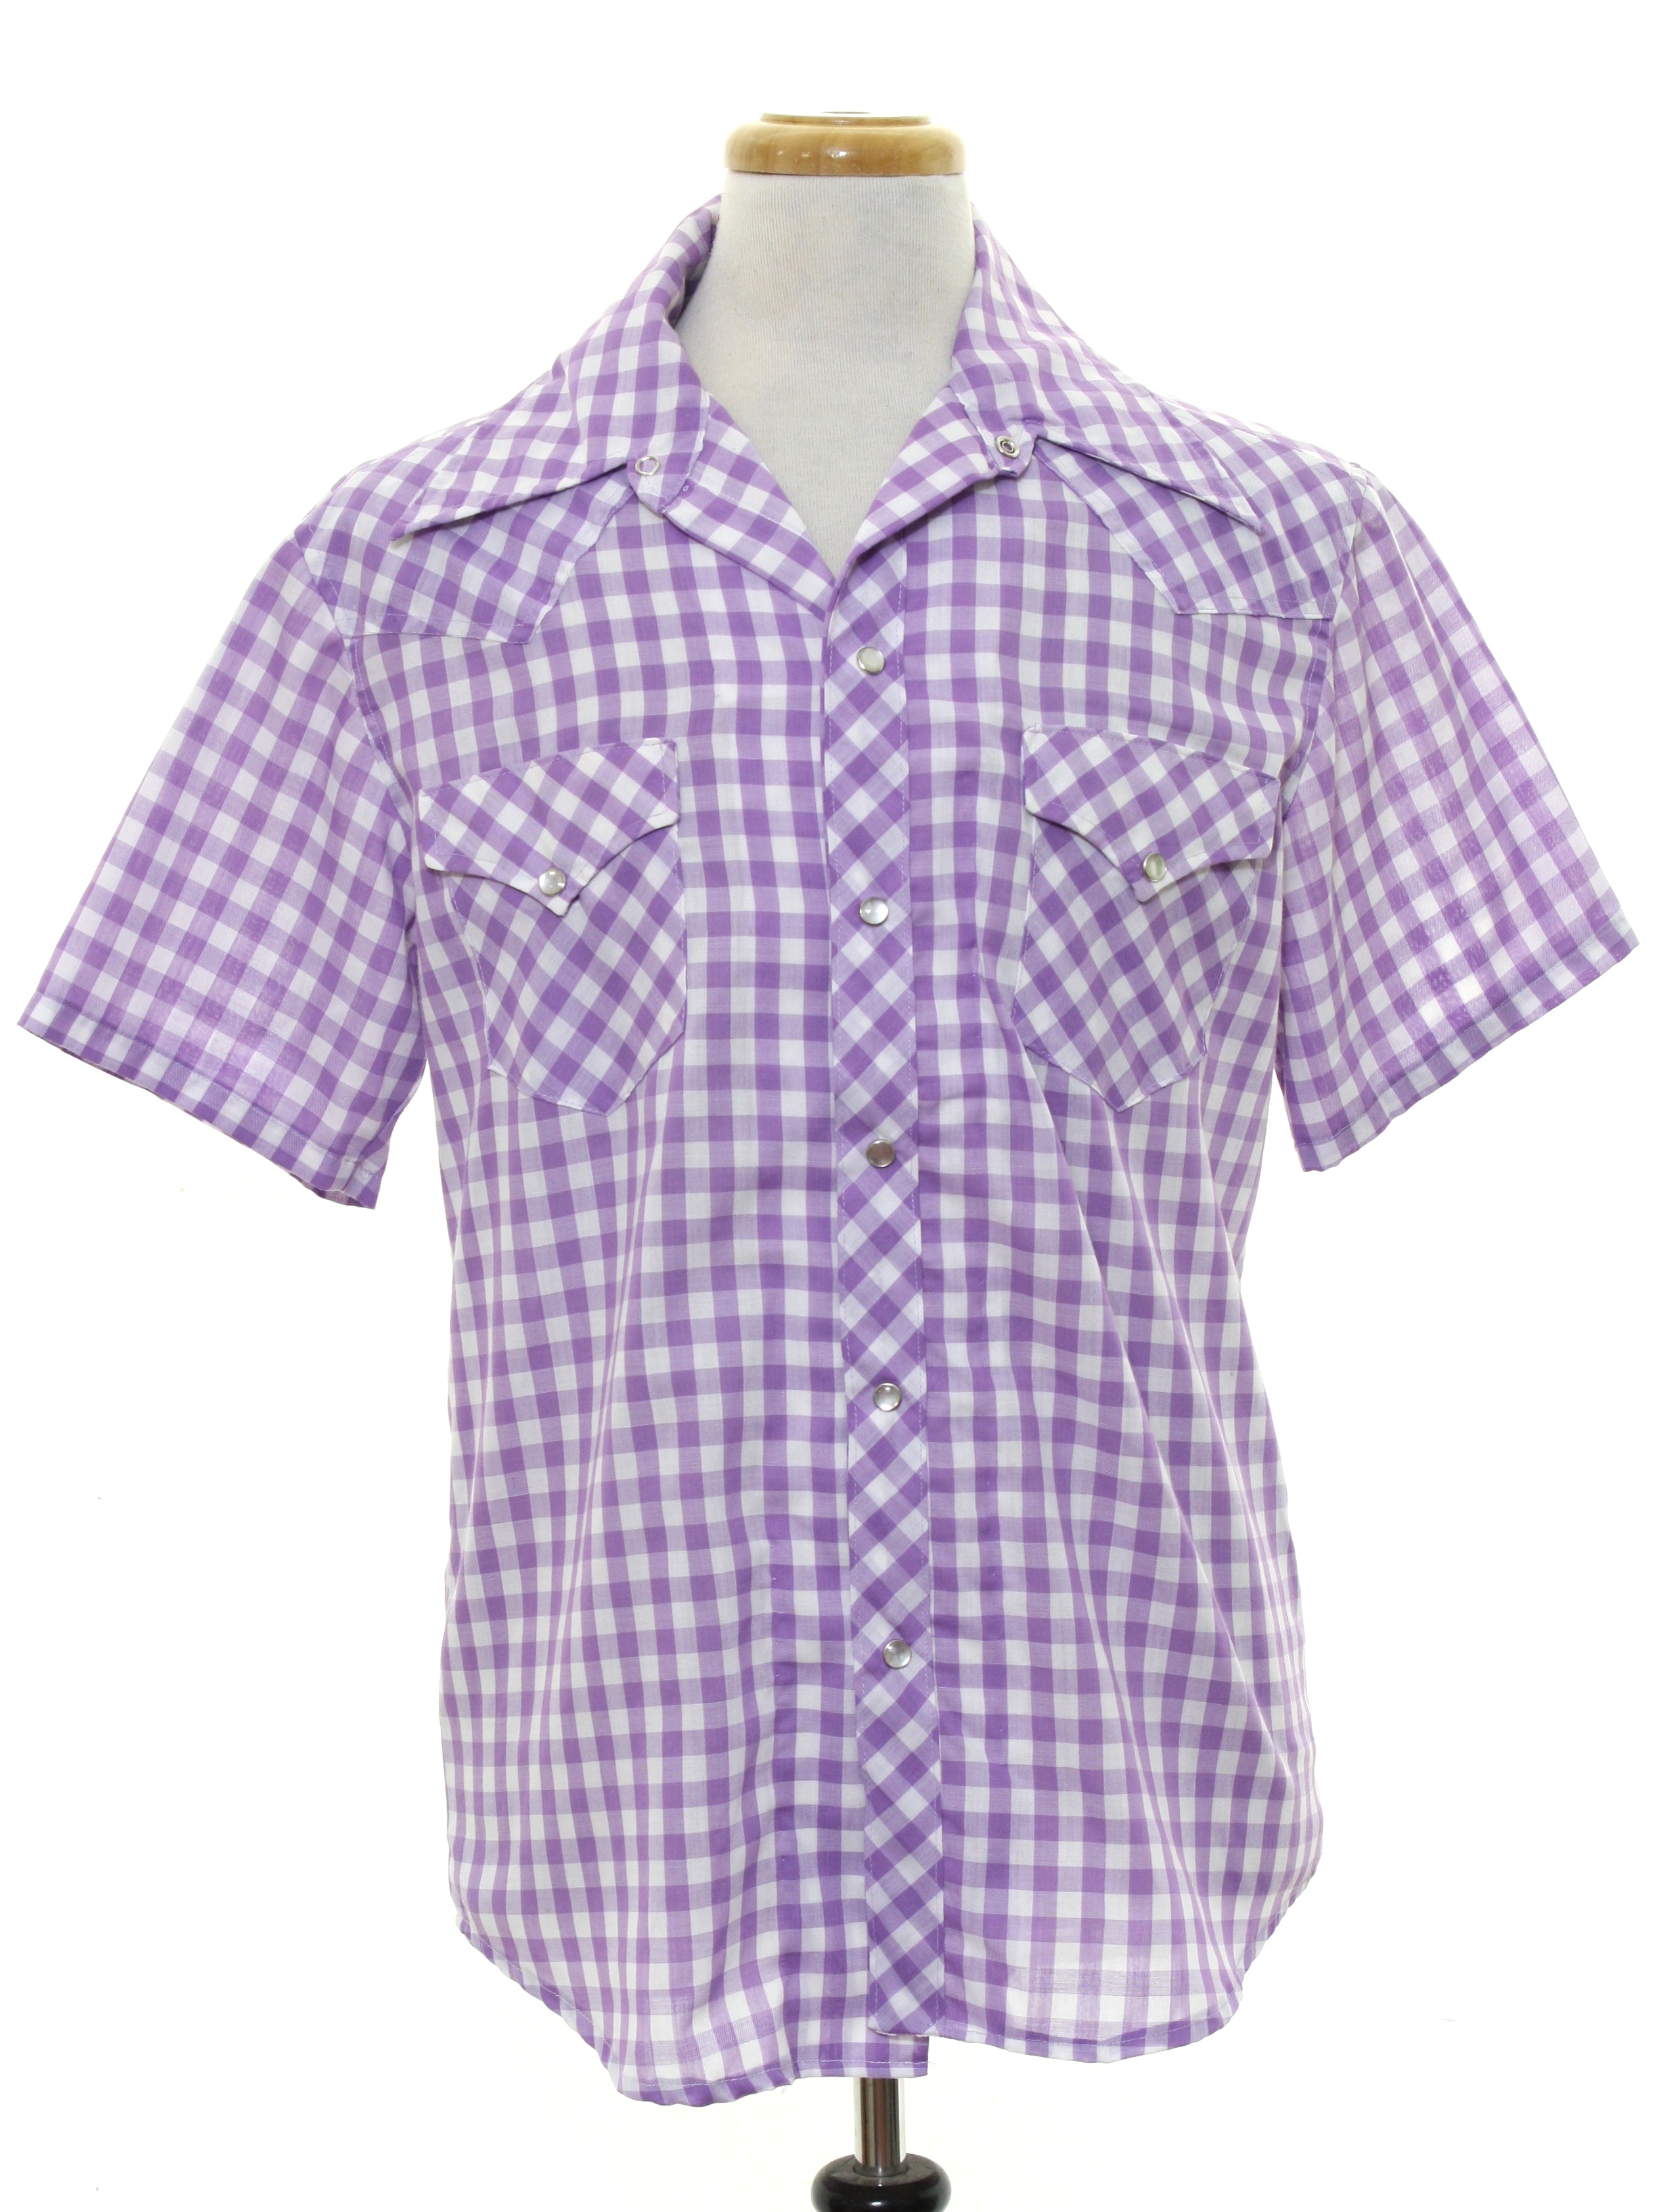 Retro 70's Western Shirt: 70s -Home sewn- Mens purple and white small ...